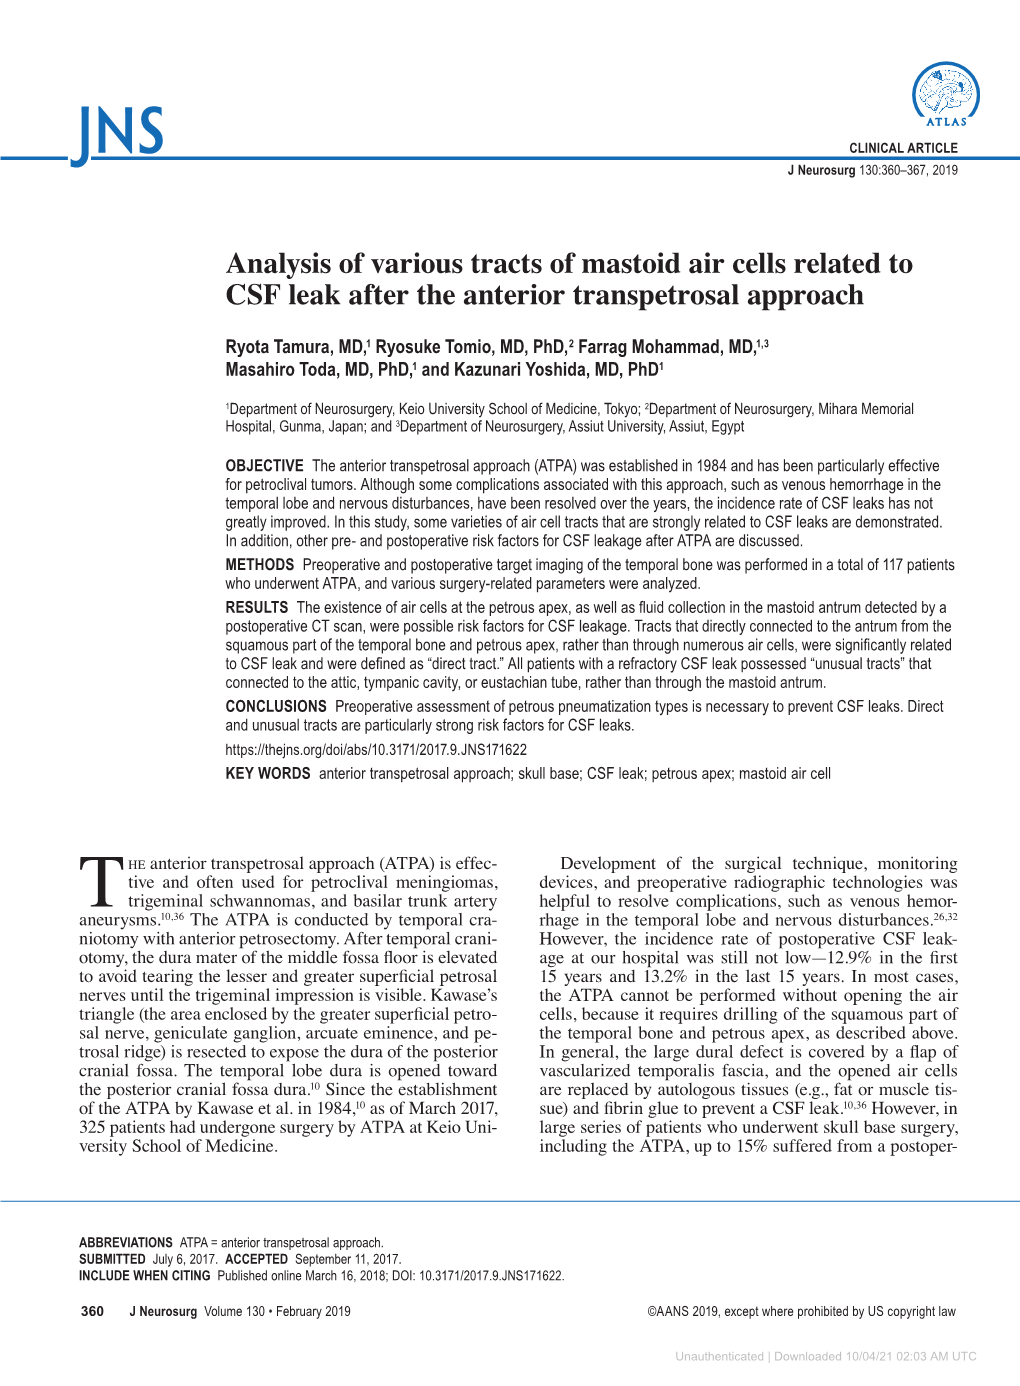 Analysis of Various Tracts of Mastoid Air Cells Related to CSF Leak After the Anterior Transpetrosal Approach